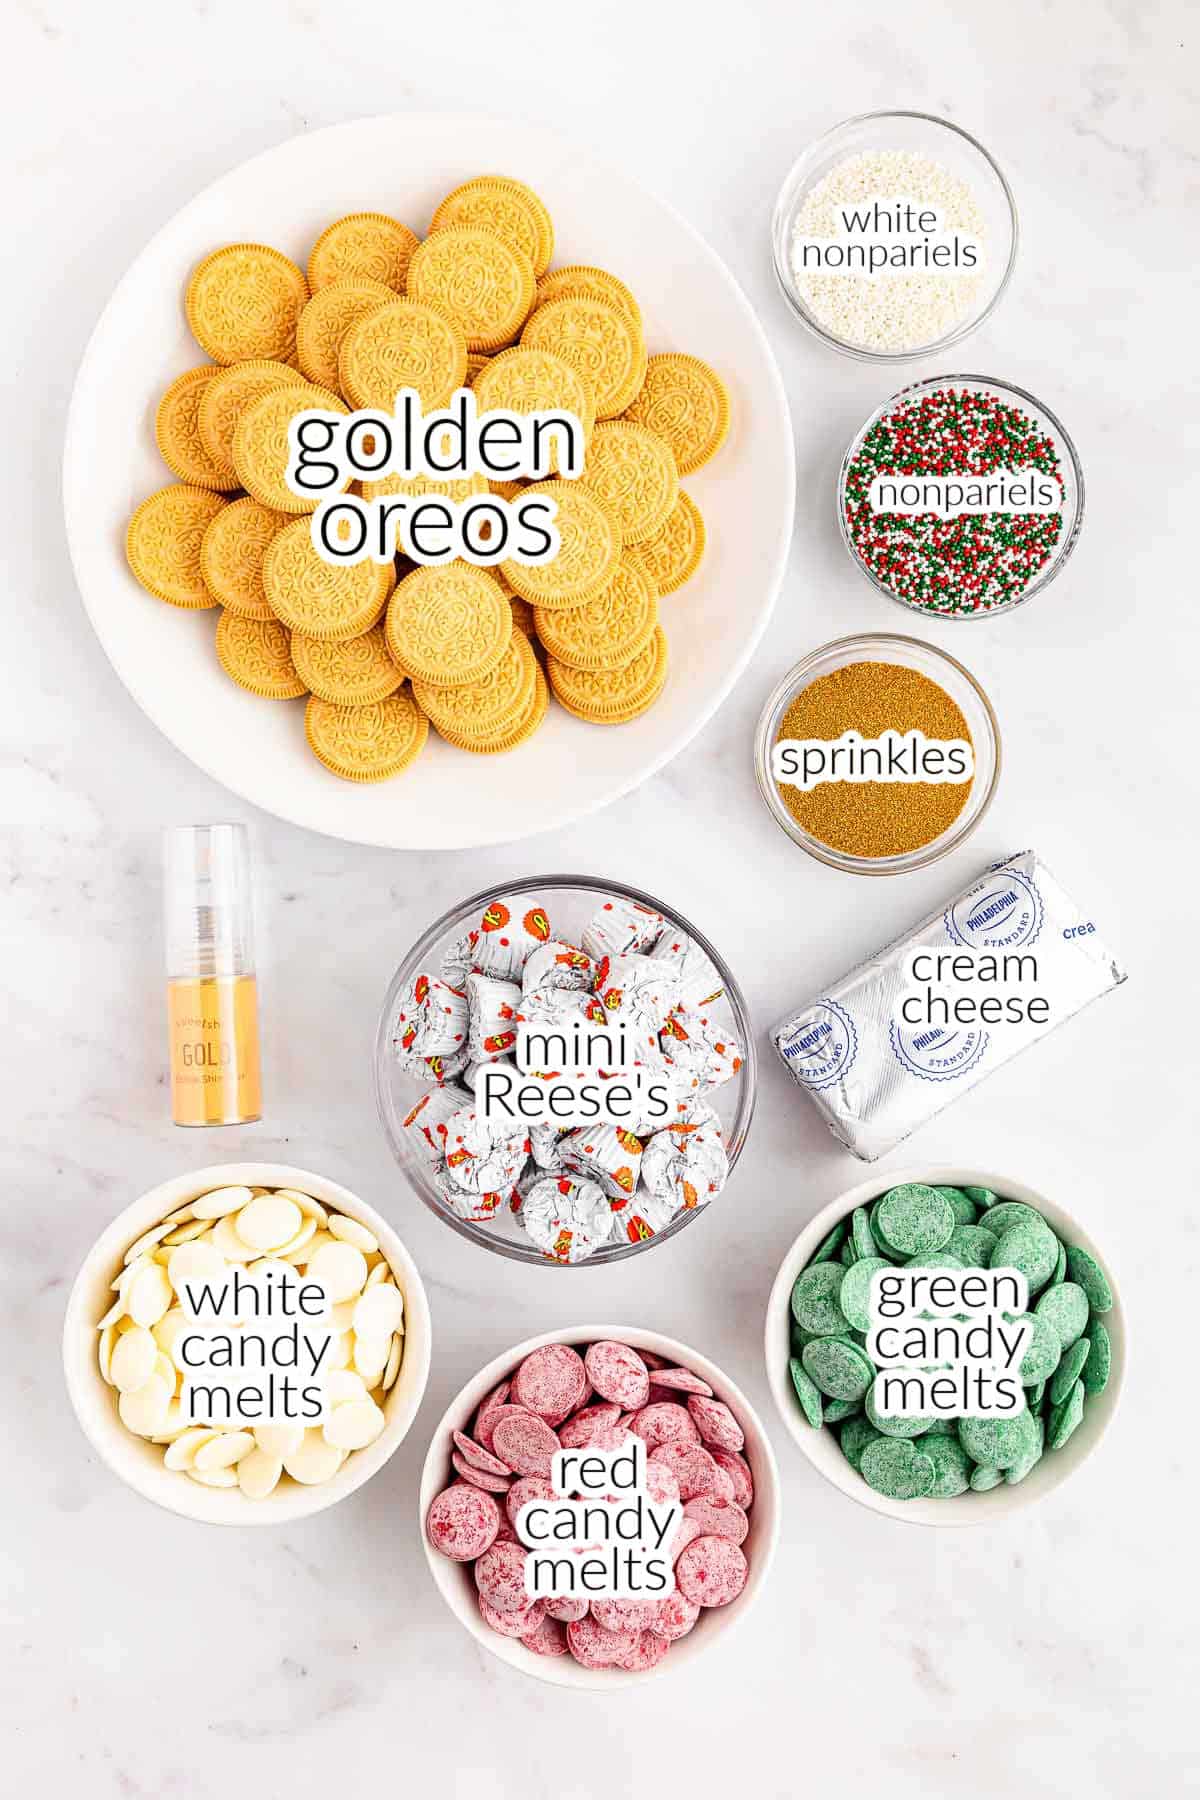 Golden oreos and ingredients for christmas oreo balls recipe in glass bowls.